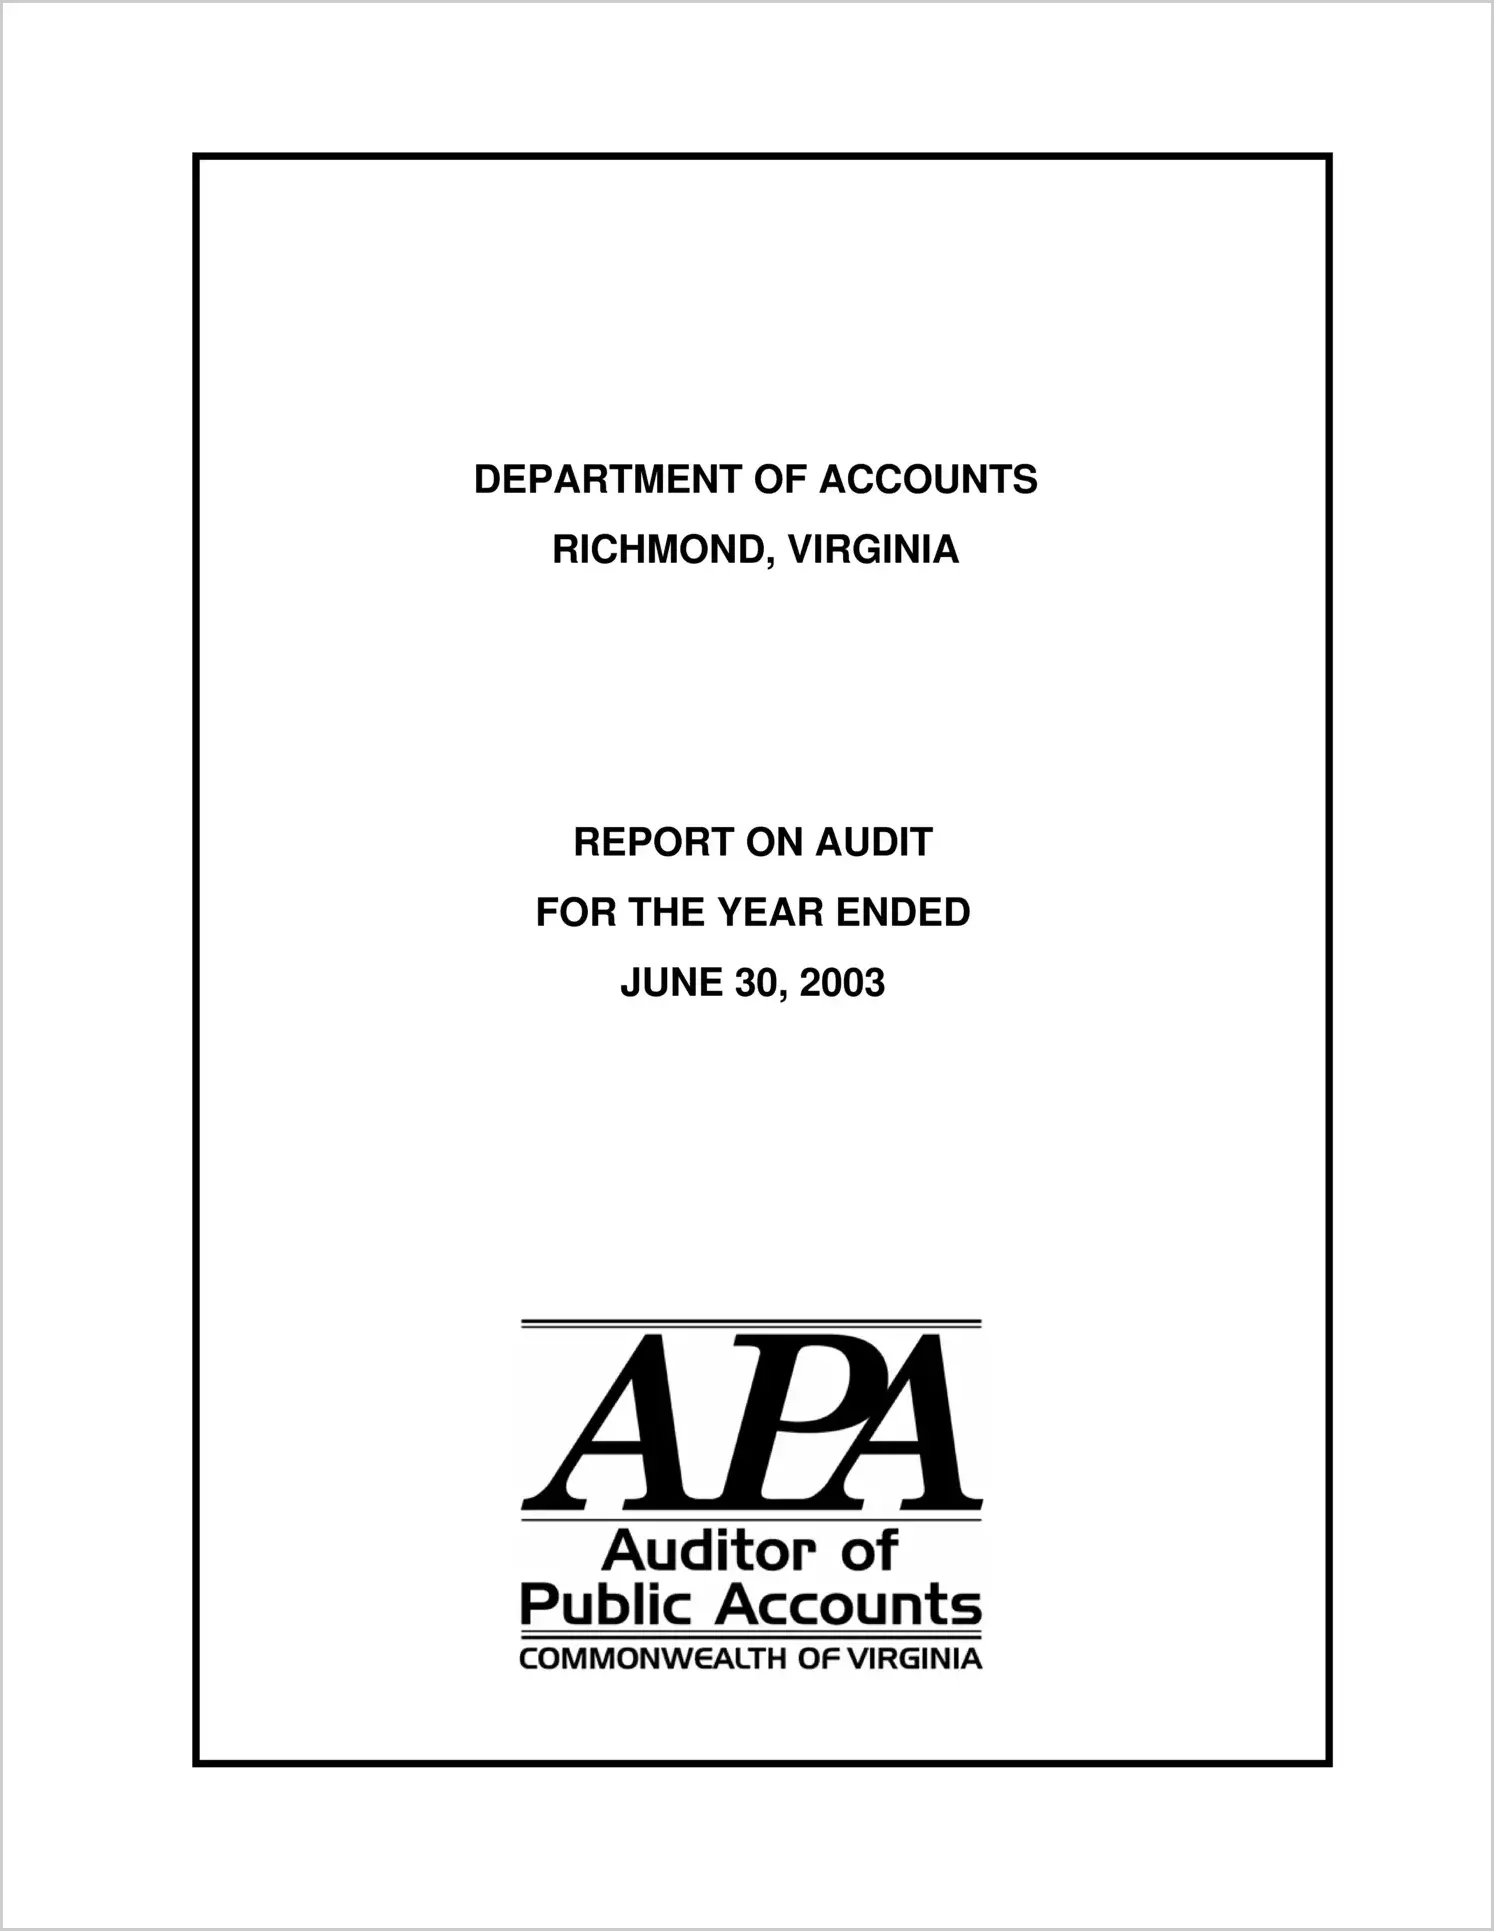 Department of Accounts Richmond, Virginia report on audit for the year ended June 30, 2003